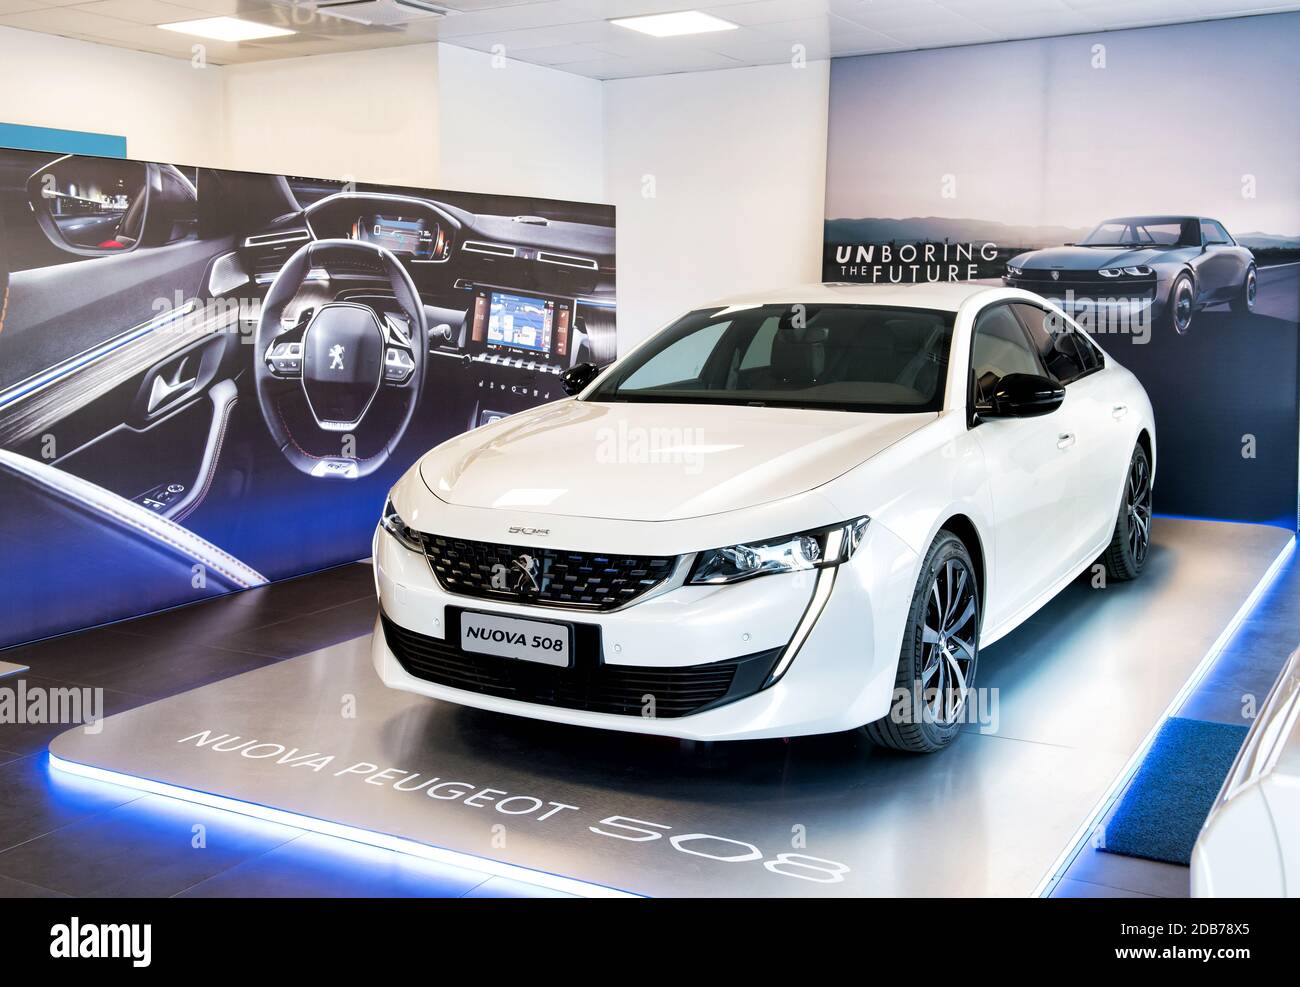 New white Peugeot 508 displayed in a dealership or motor show under overhead lighting on a raised platform in a showroom Stock Photo